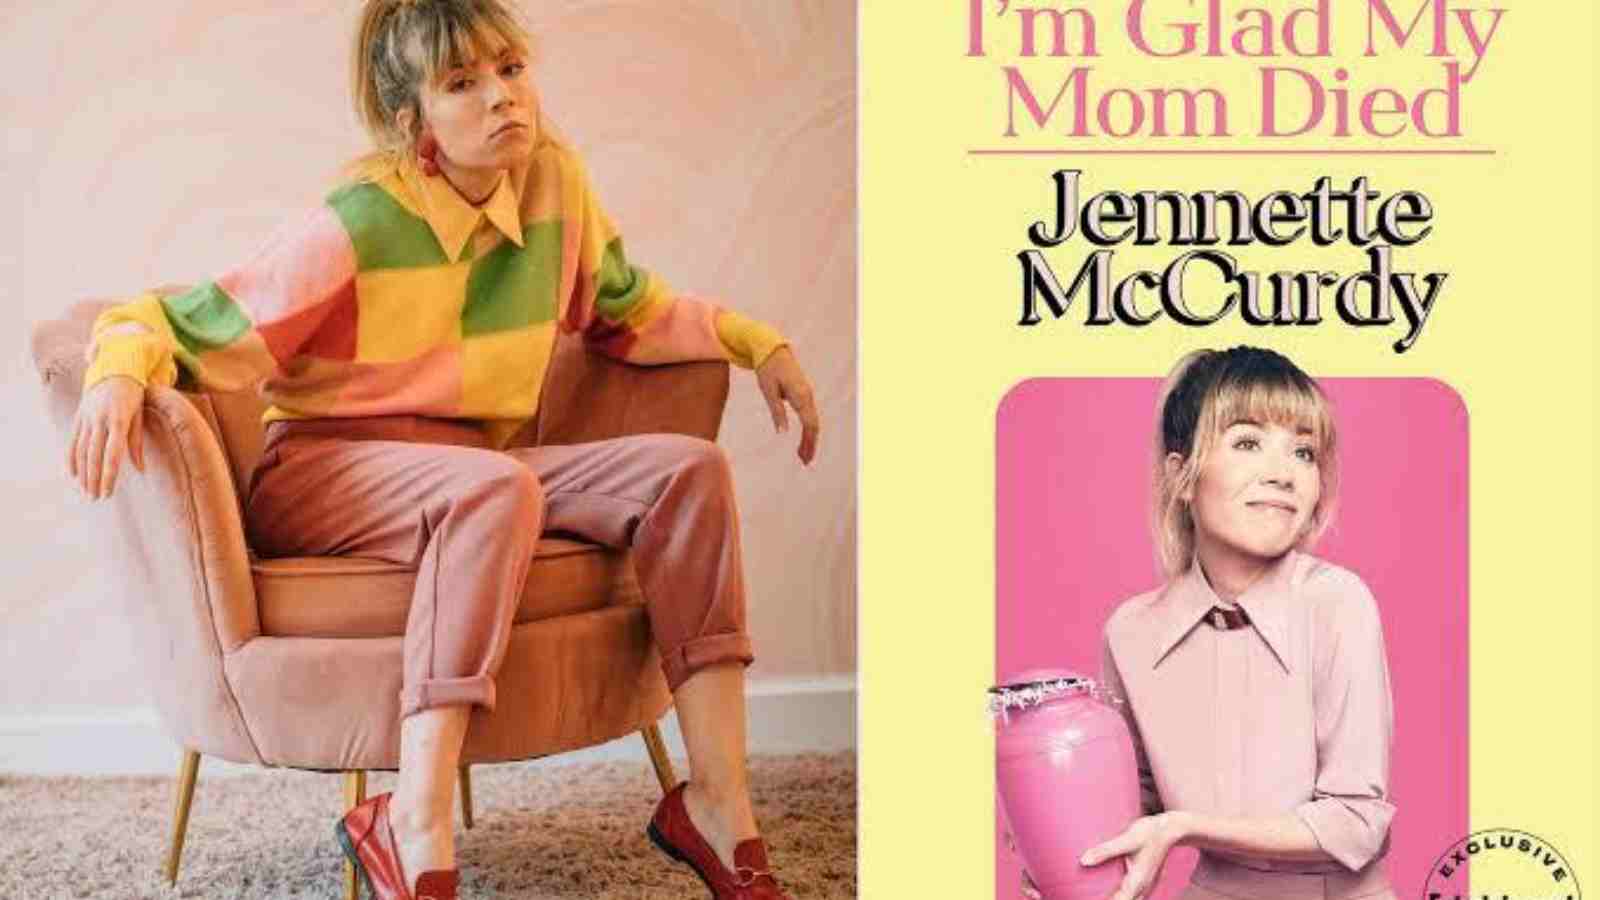 Jennette McCurdy Reveals the title of her memoir 'I'm Glad My Mom Died'